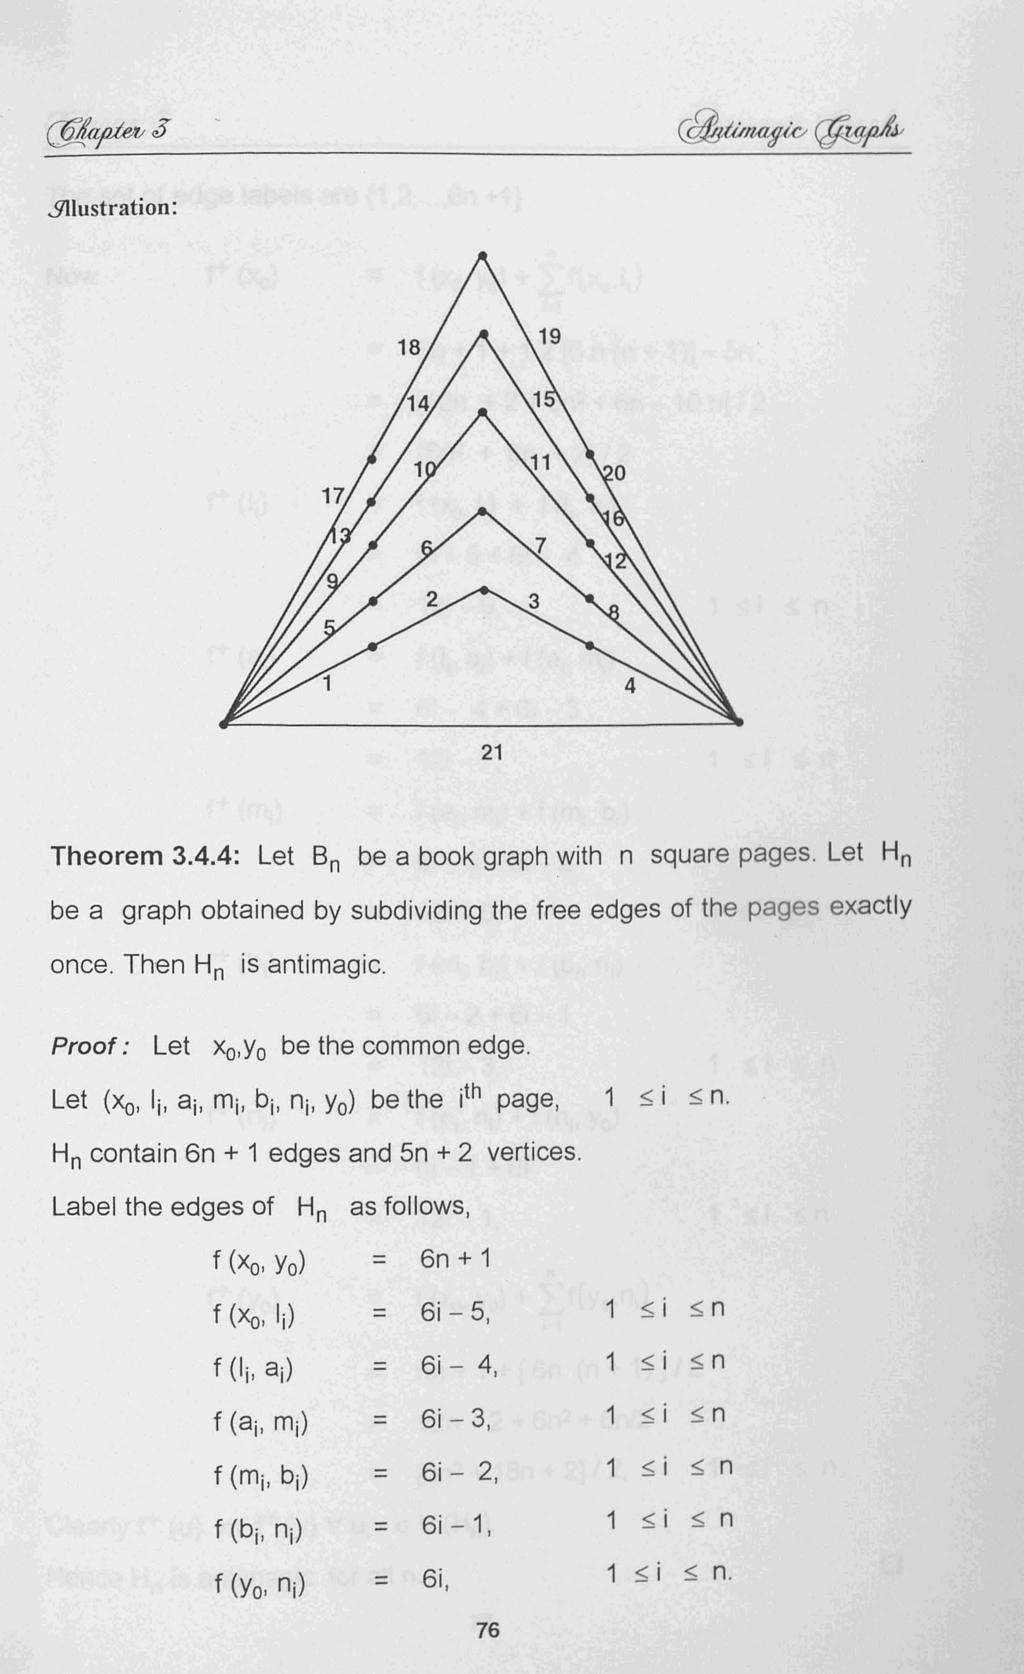 $llustration: 21 Theorem 3.4.4: Let B n be a book graph with n square pages. Let Hn be a graph obtained by subdividing the free edges of the pages exactly once. Then H n is antimagic.